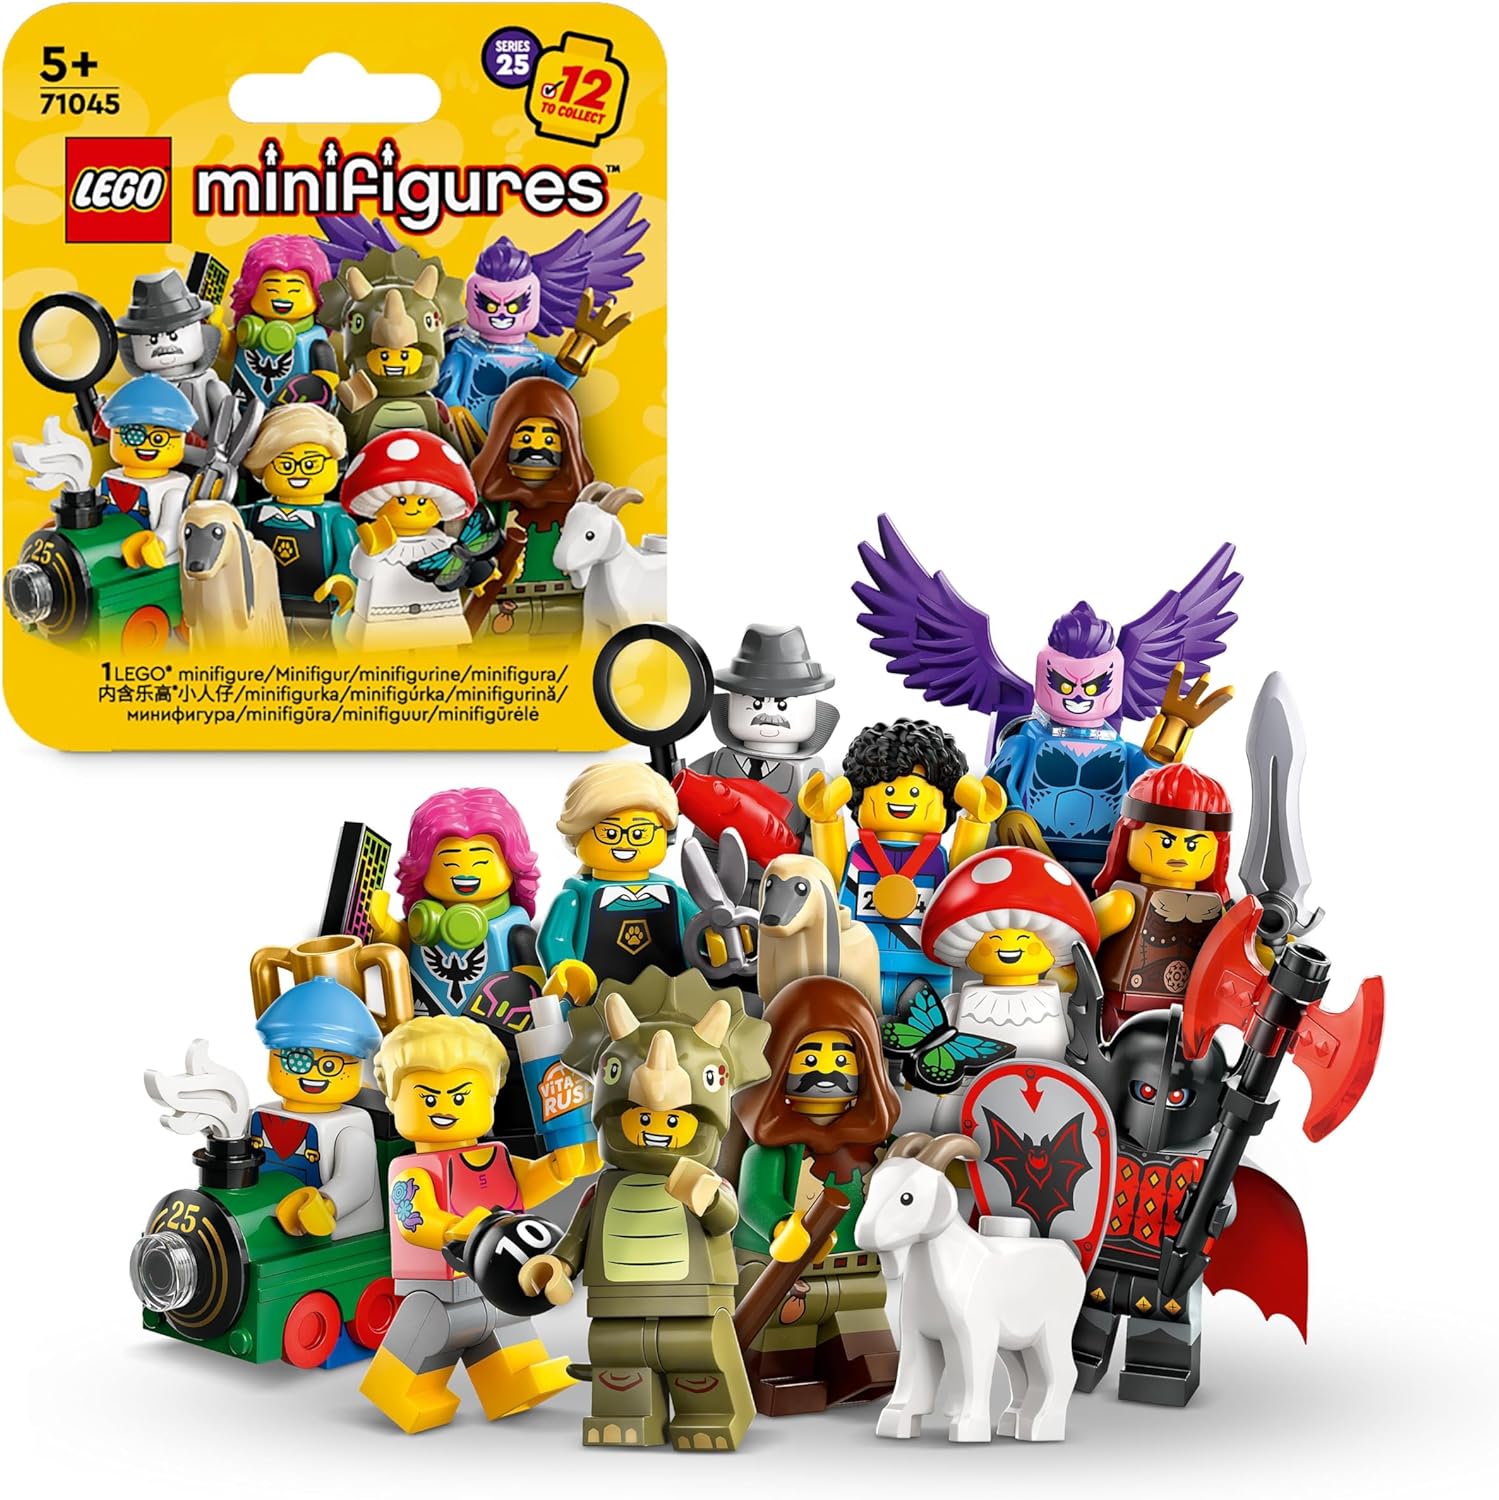 LEGO Mini Figures Series 25 (71045), Toy with Collectible Figures for Role Play, Small Set for Adventure, Independent Gaming Experience, Gift Idea for Boys and Girls from 5 Years, 71045